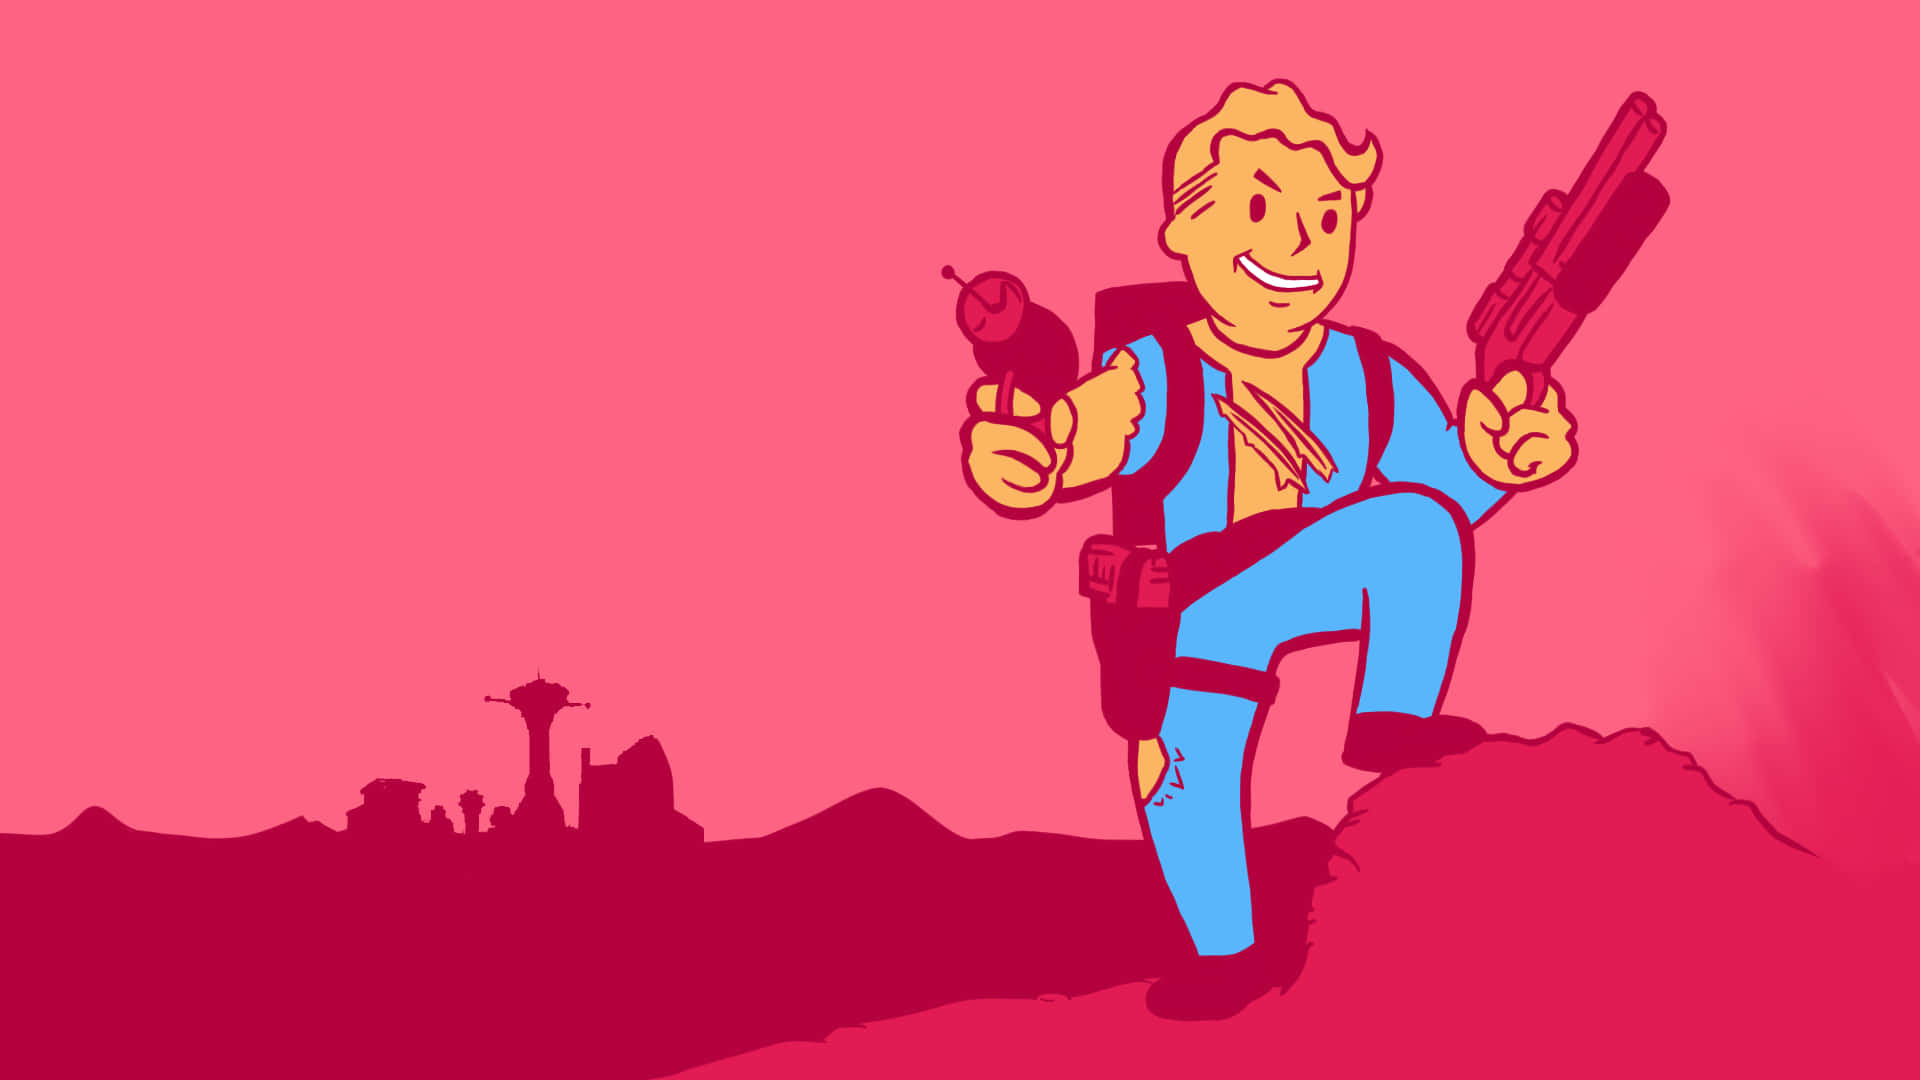 "Feel secure with Vault Boy by your side" Wallpaper